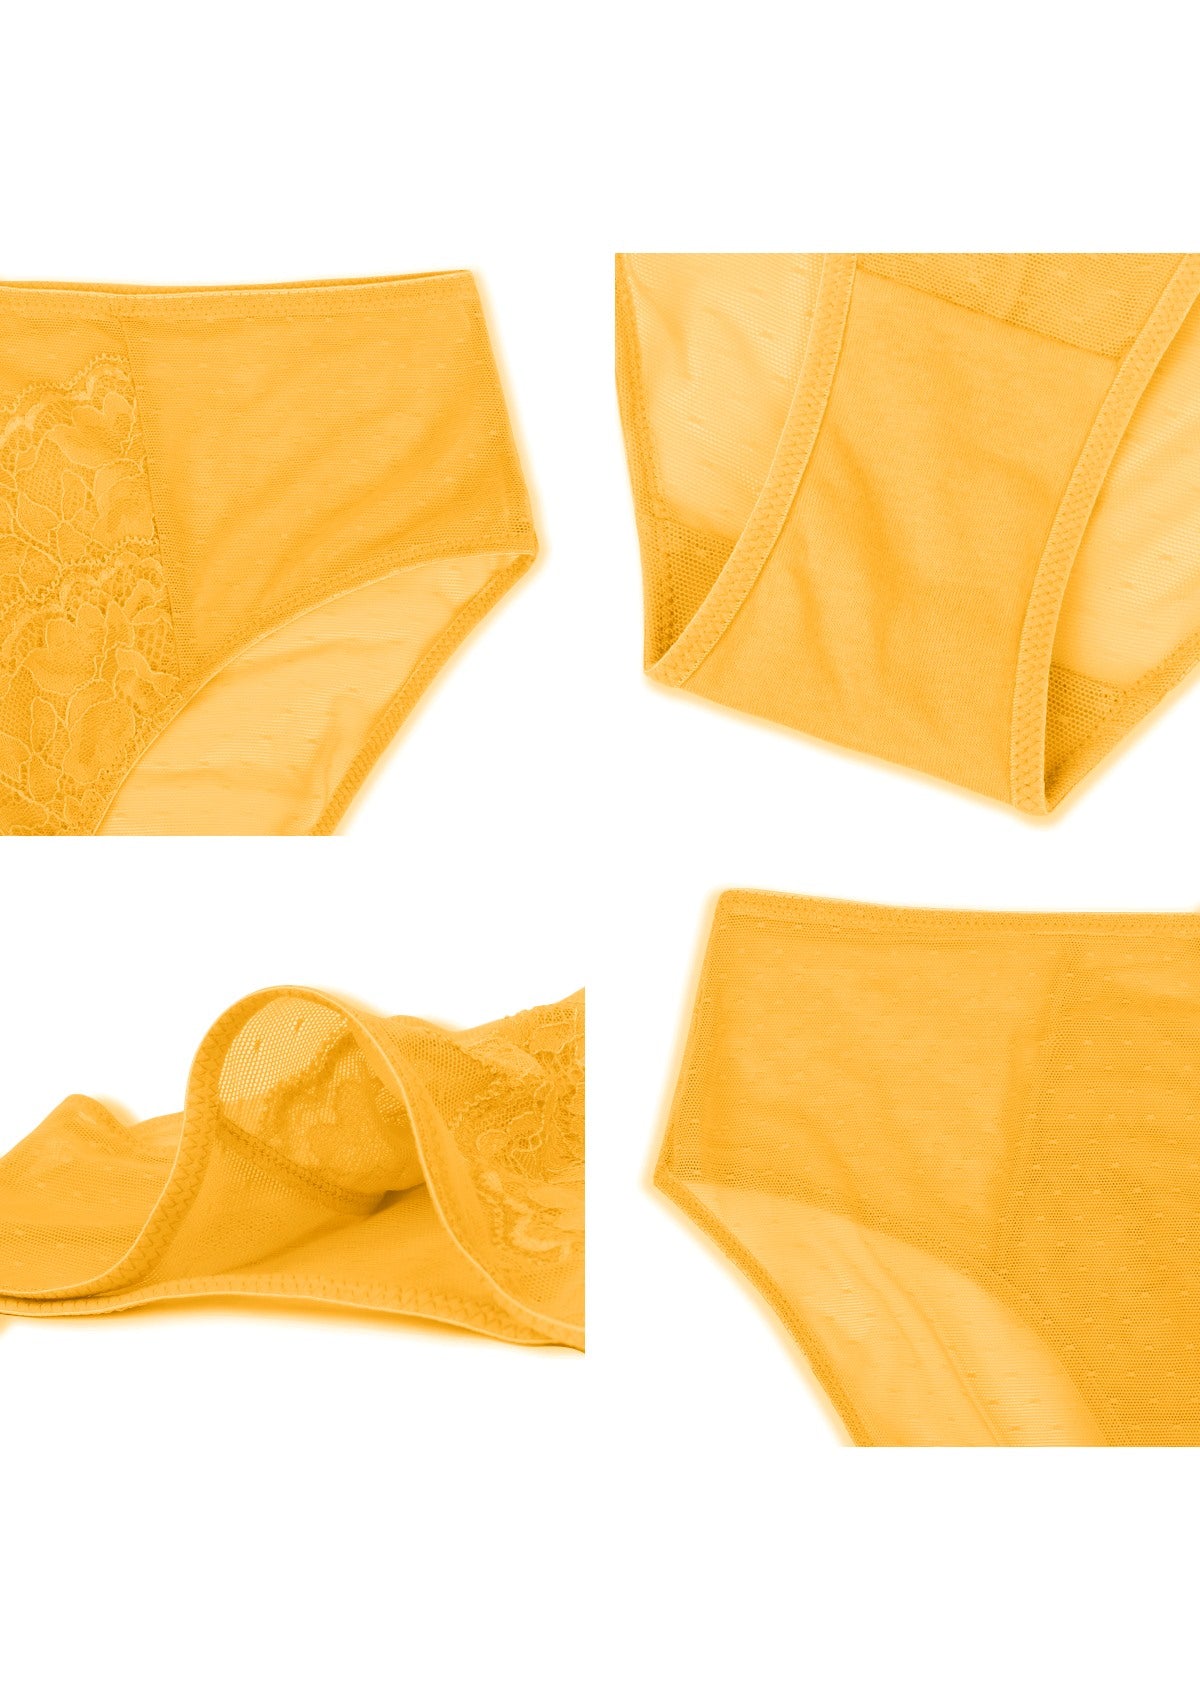 HSIA Enchante High-Rise Floral Lacy Panty-Comfort In Style - XXXL / Cadmium Yellow